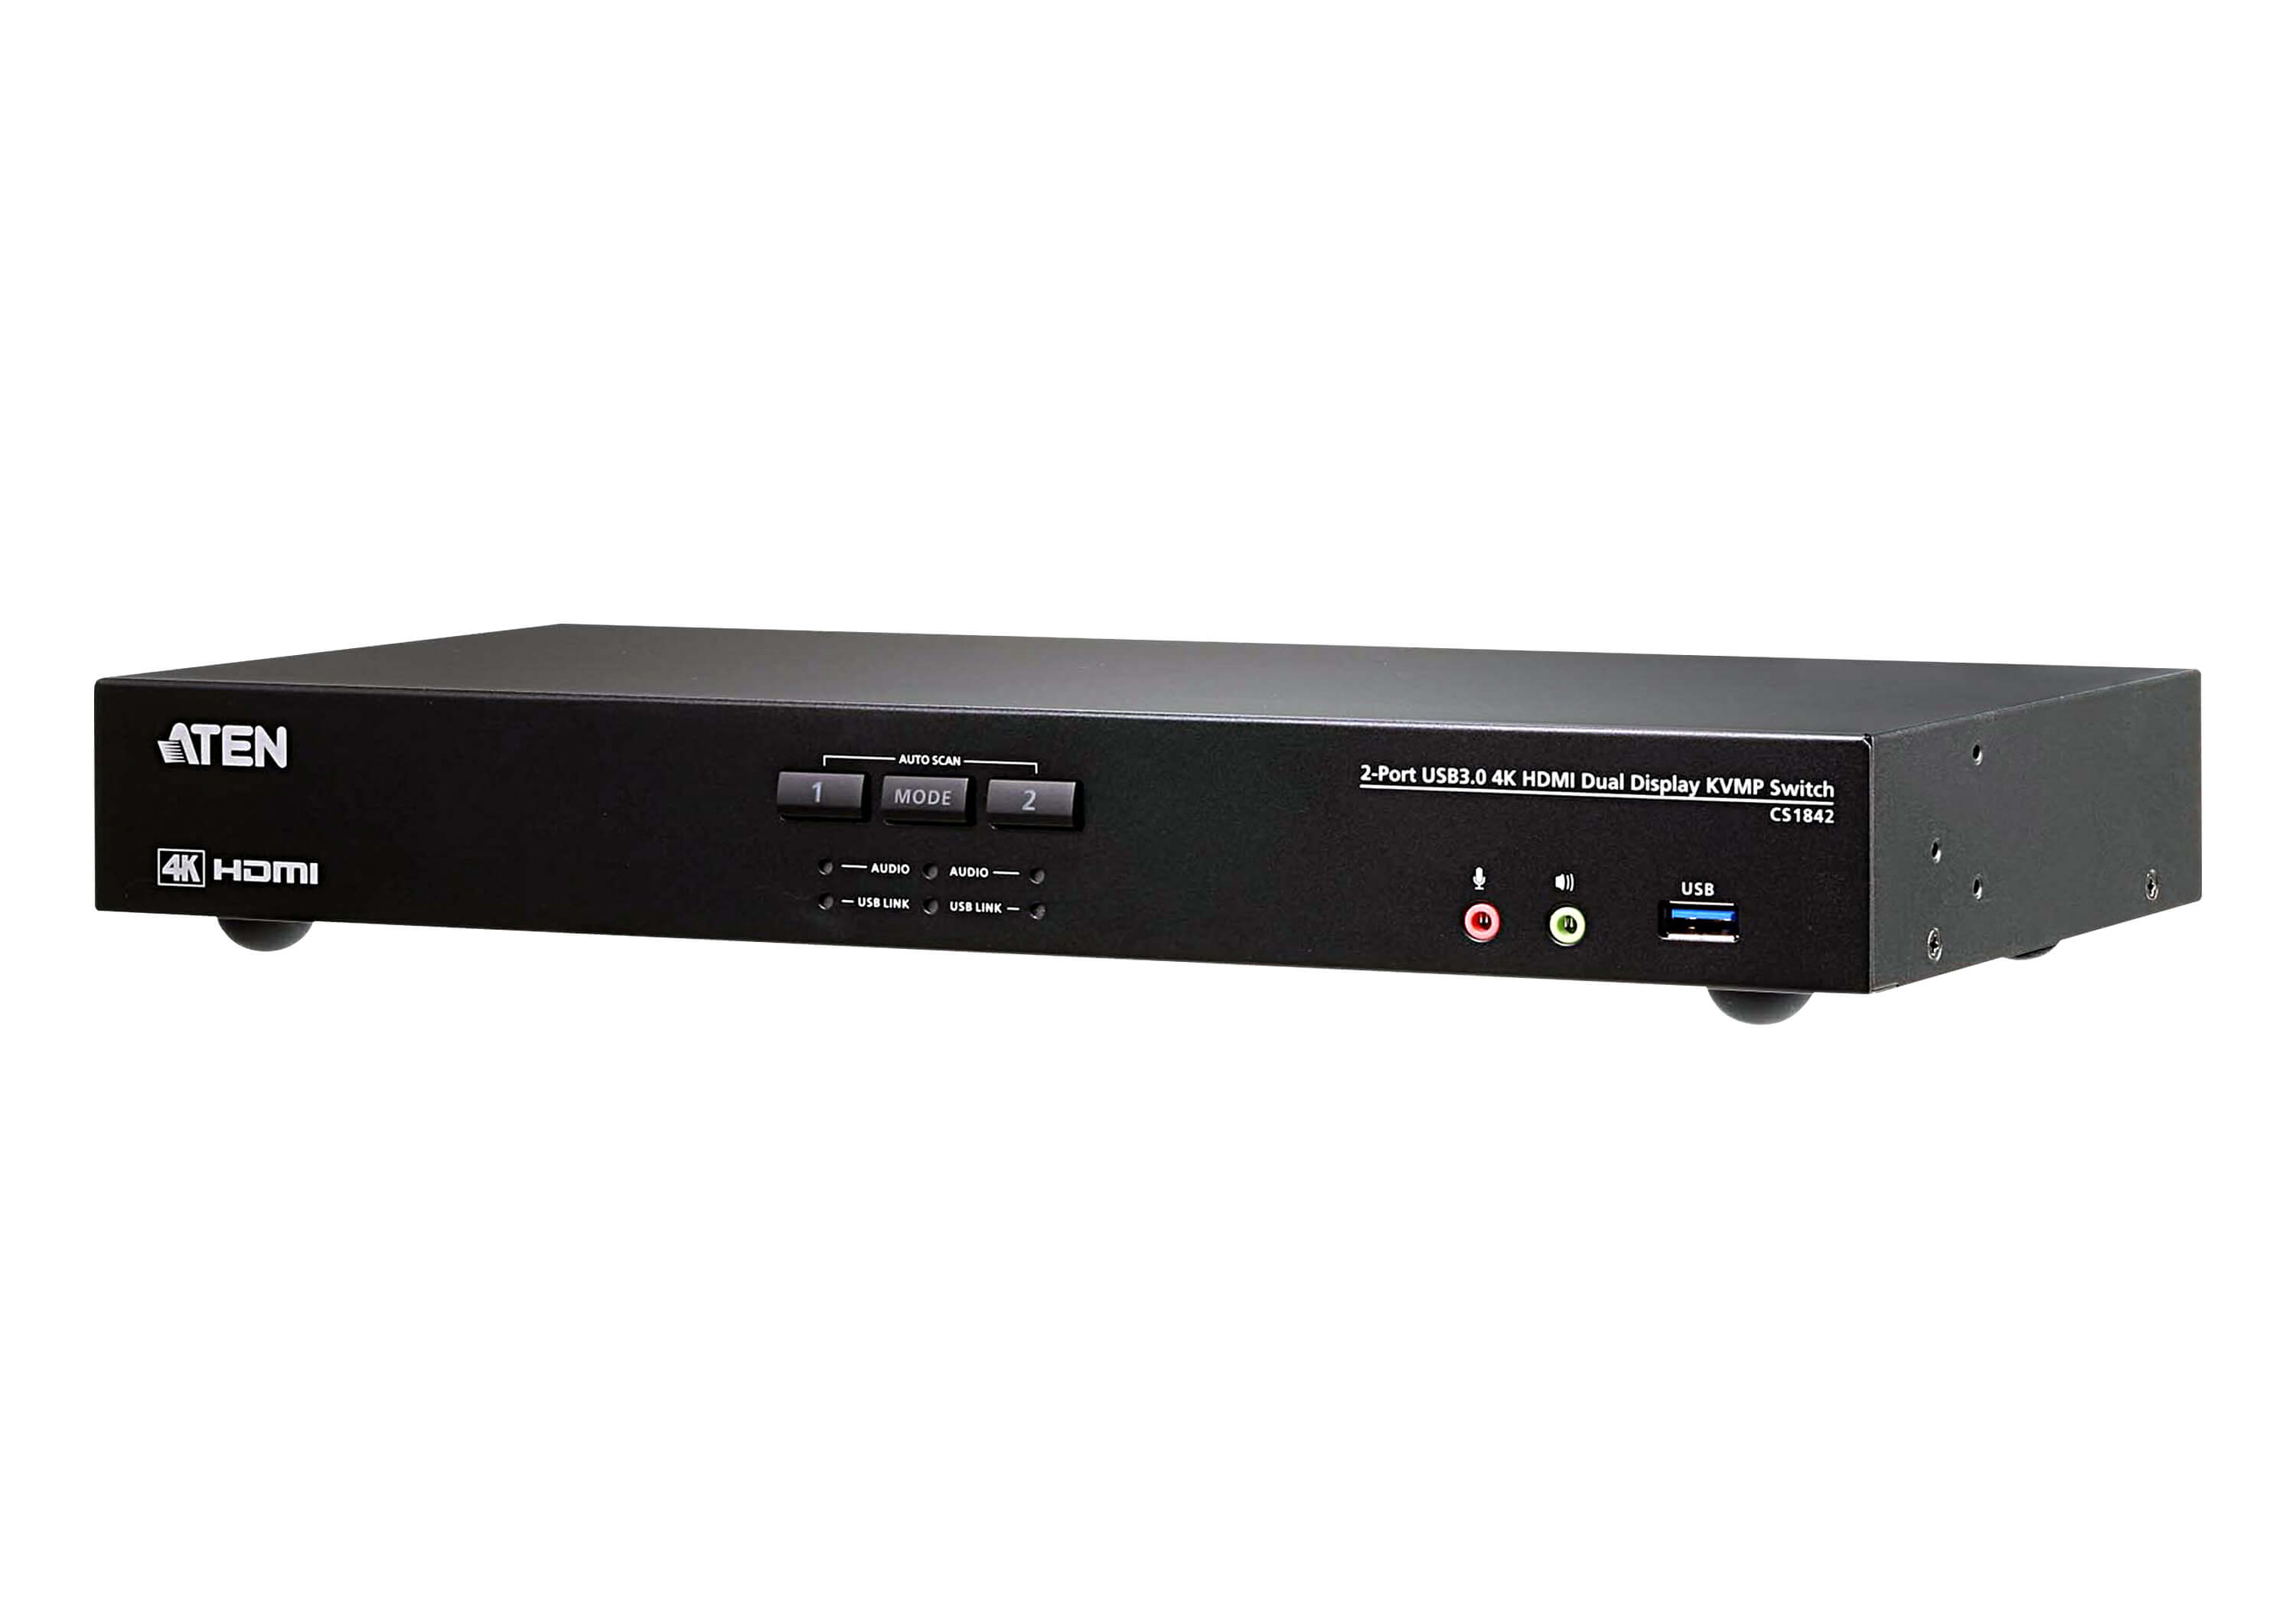 Aten Desktop KVMP Switch 2 Port Dual Display 4k HDMI w/ audio, Cables Included, 2x USB Port, Selection Via Front Panel